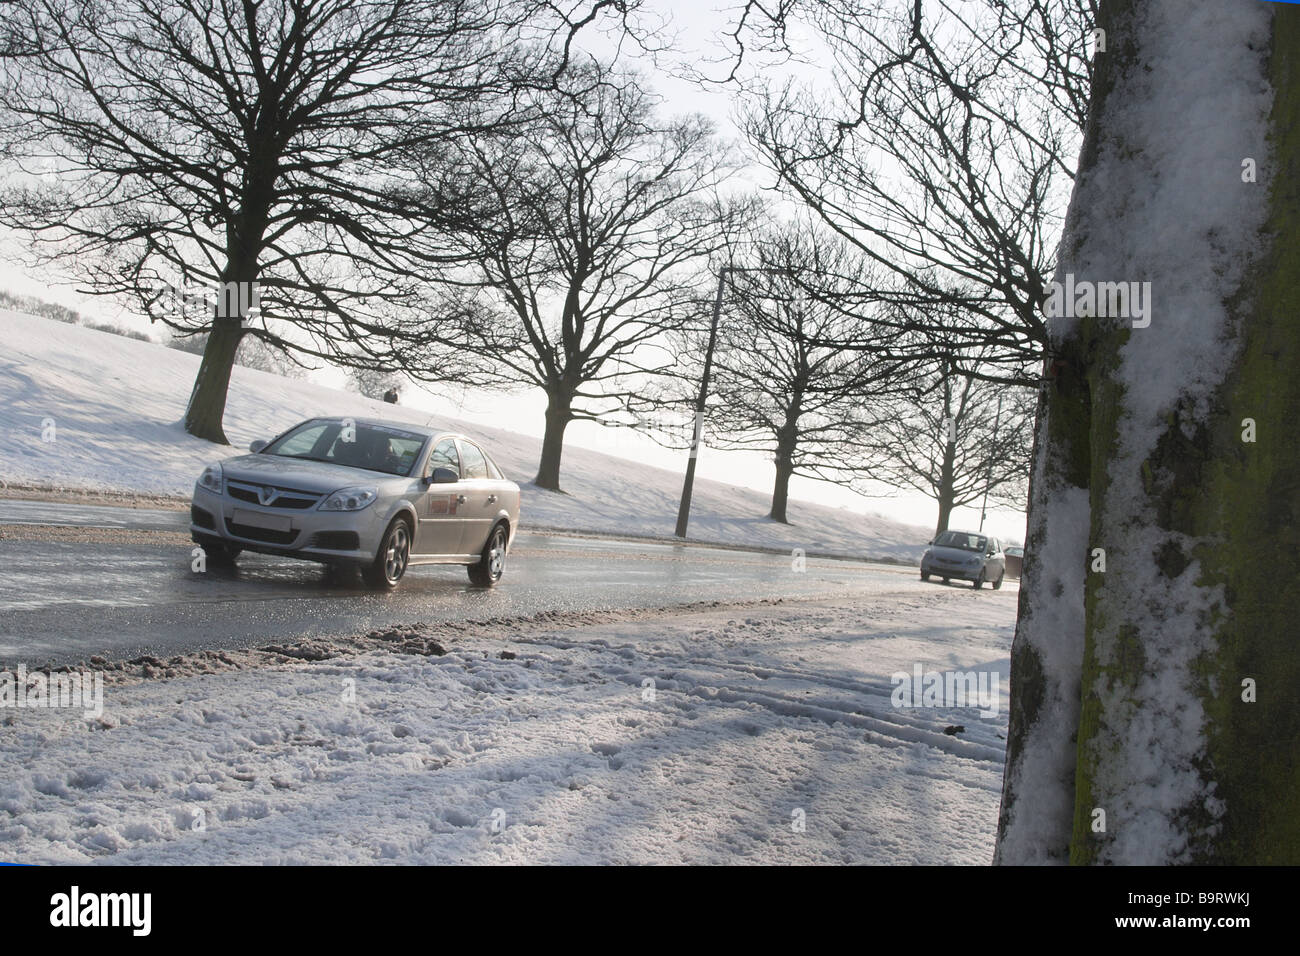 Snow scene with trees and road running through and cars travelling causing water spray. shot in strong sunlight causing shadows Stock Photo